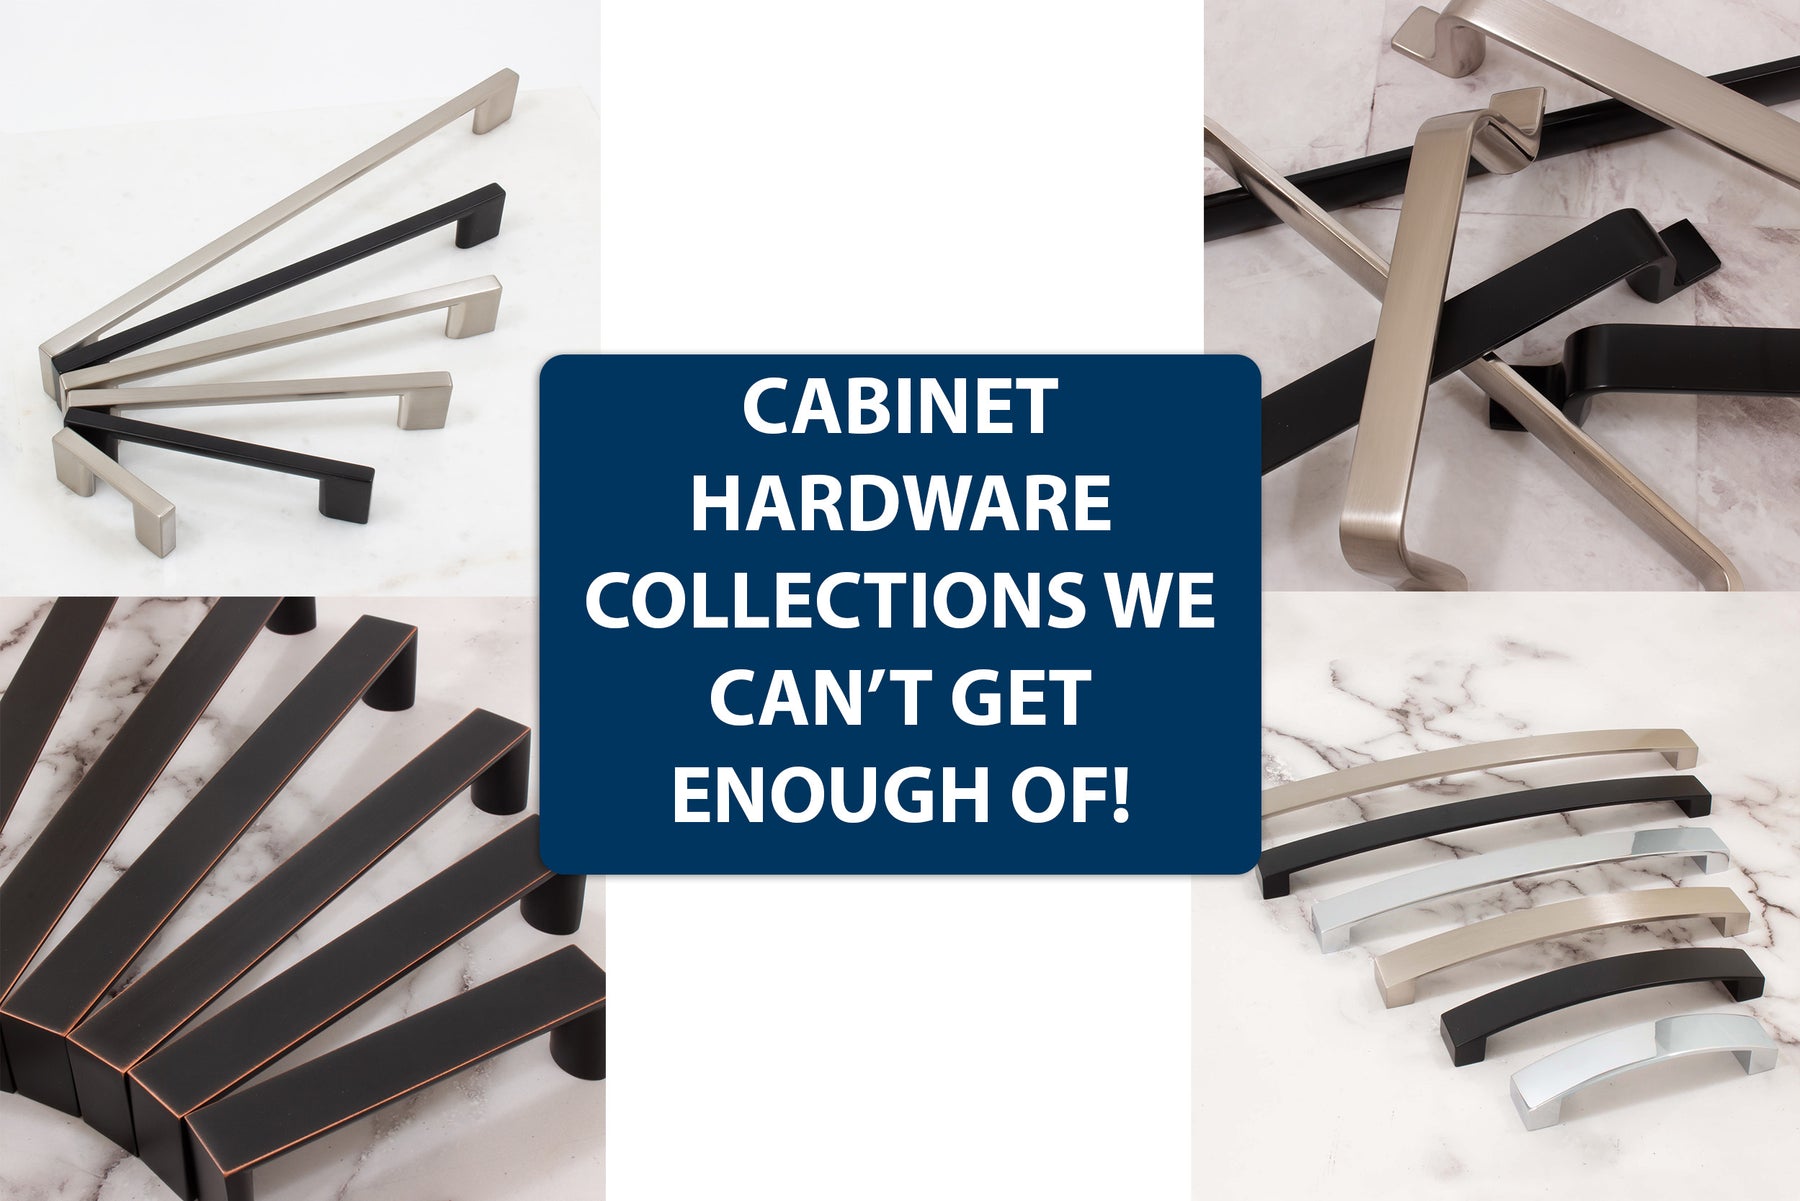 Cabinet Hardware Collections We Can't Get Enough Of!